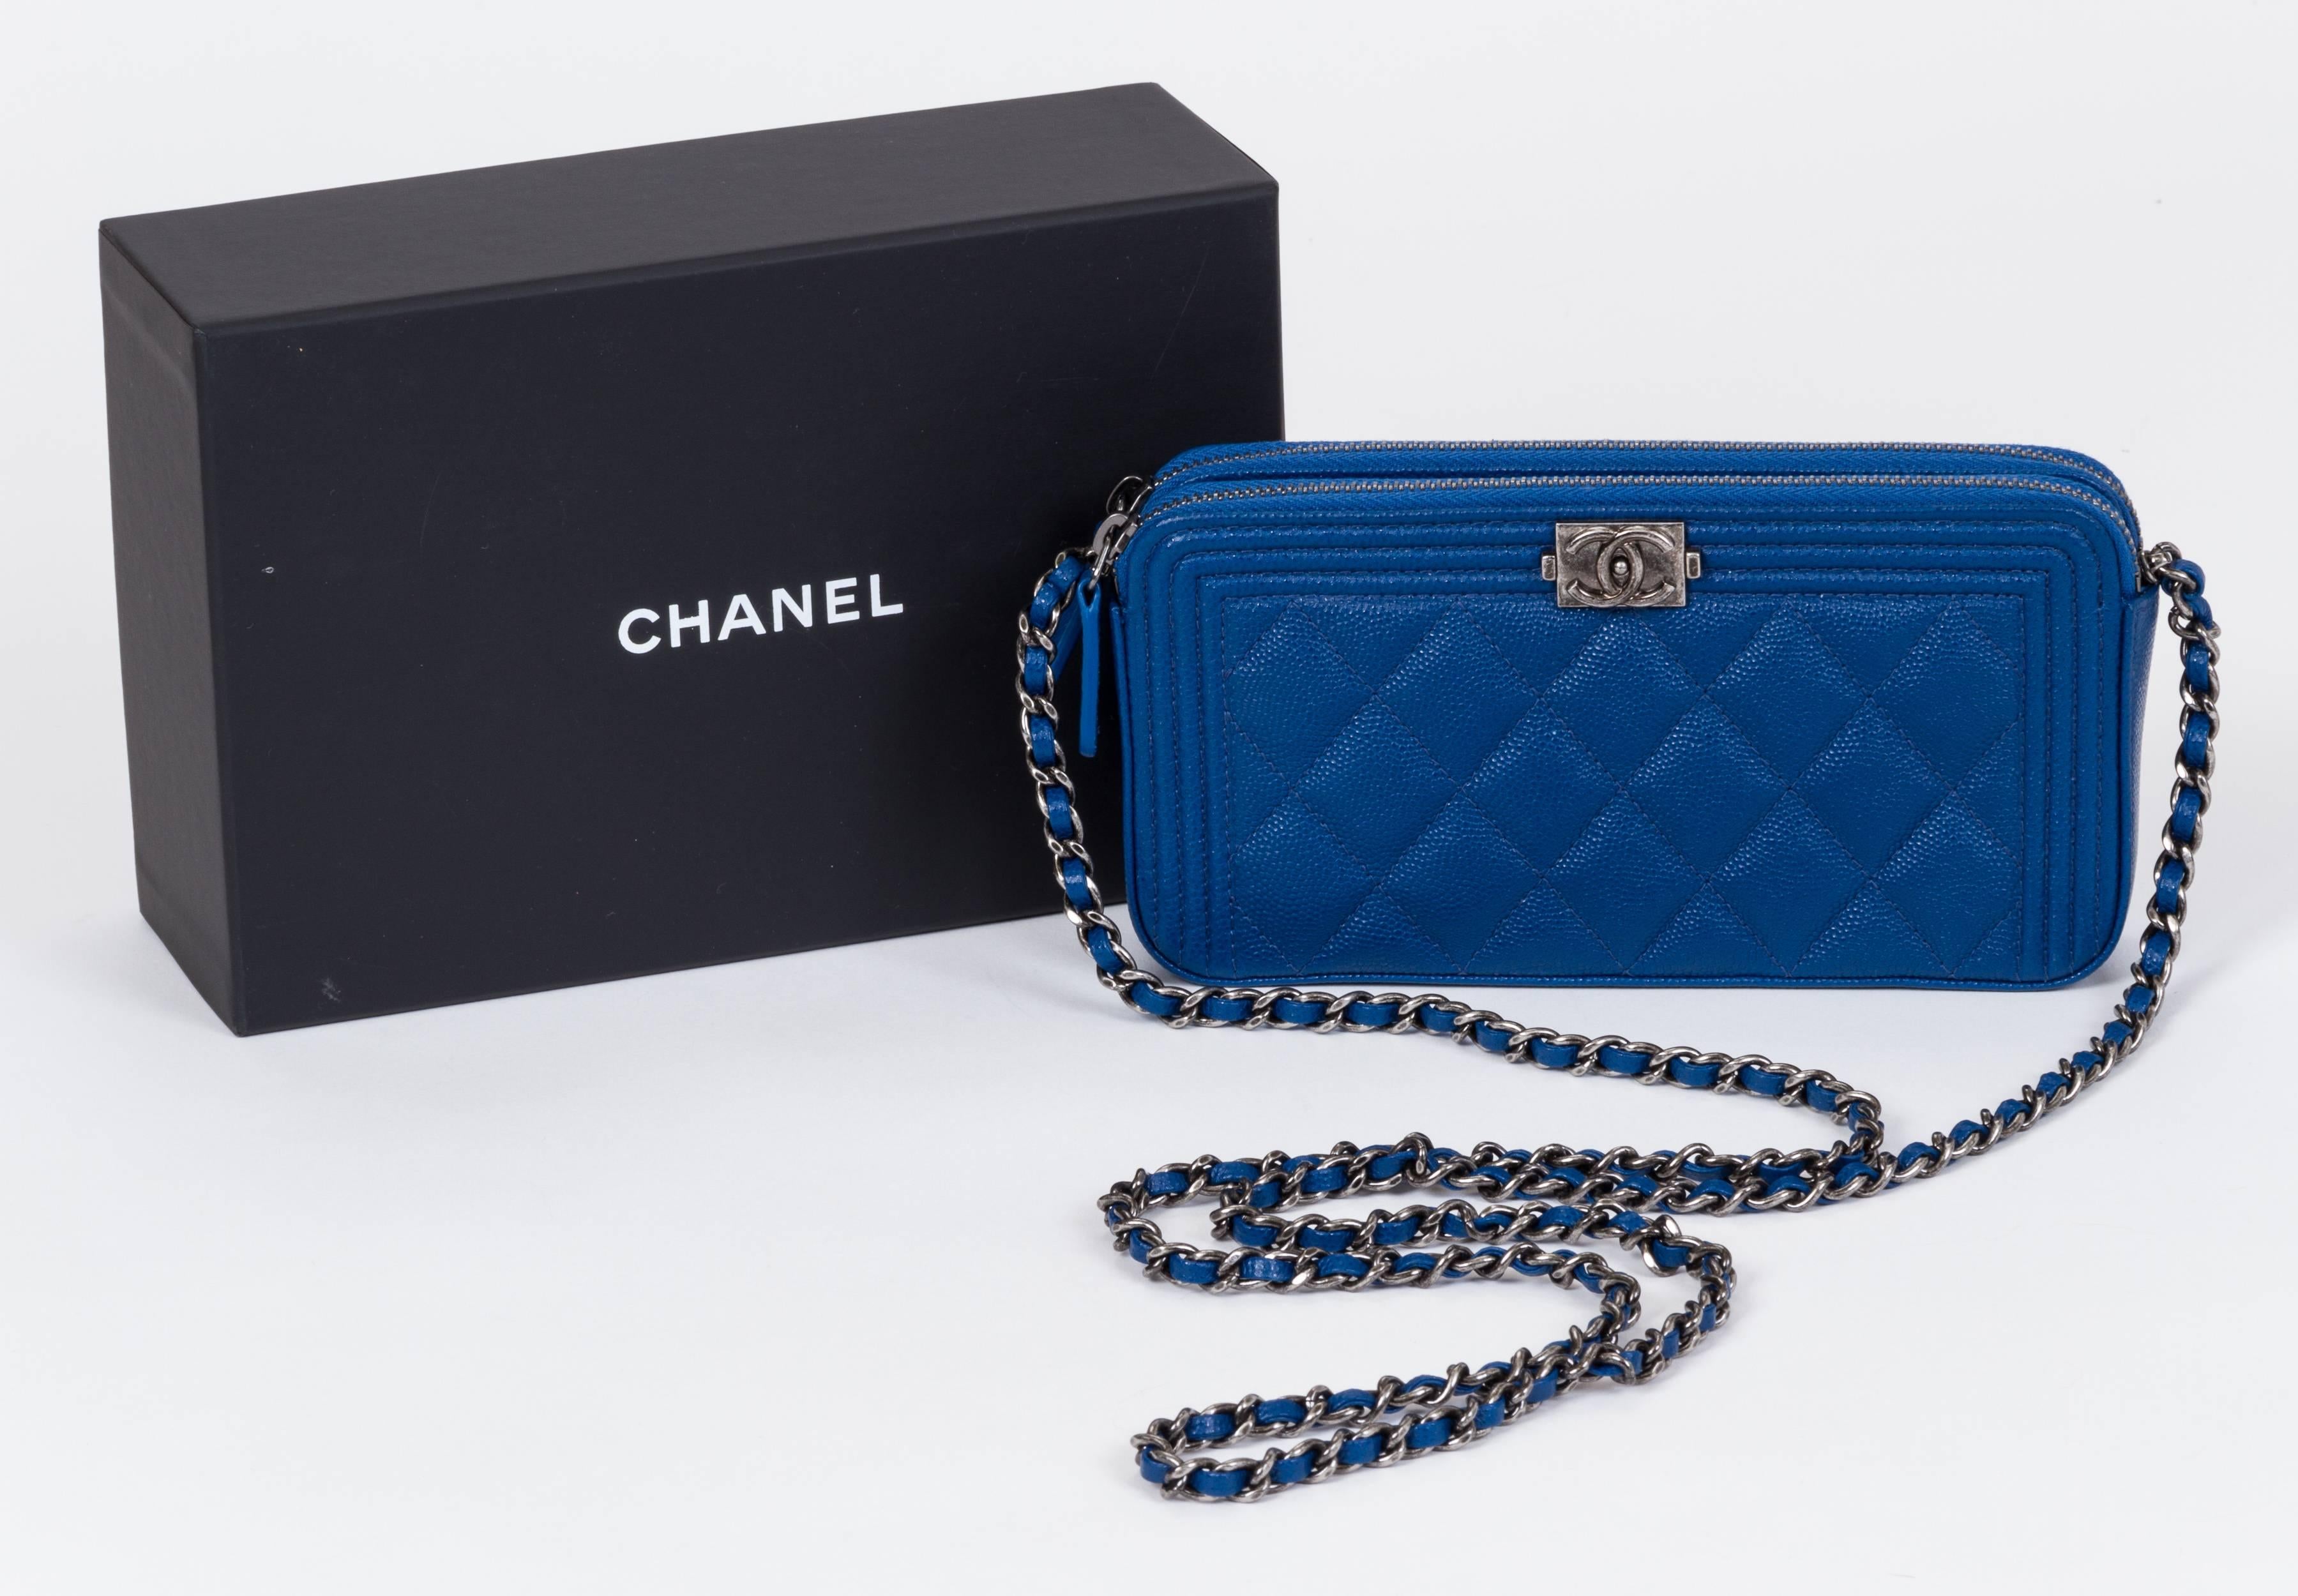 Chanel brand new in box new style wallet on a chain. Two zipped compartments and one center open to place your phone (phone in photo is not included). Comes with hologram, ID card, dust cover, box and ribbon.